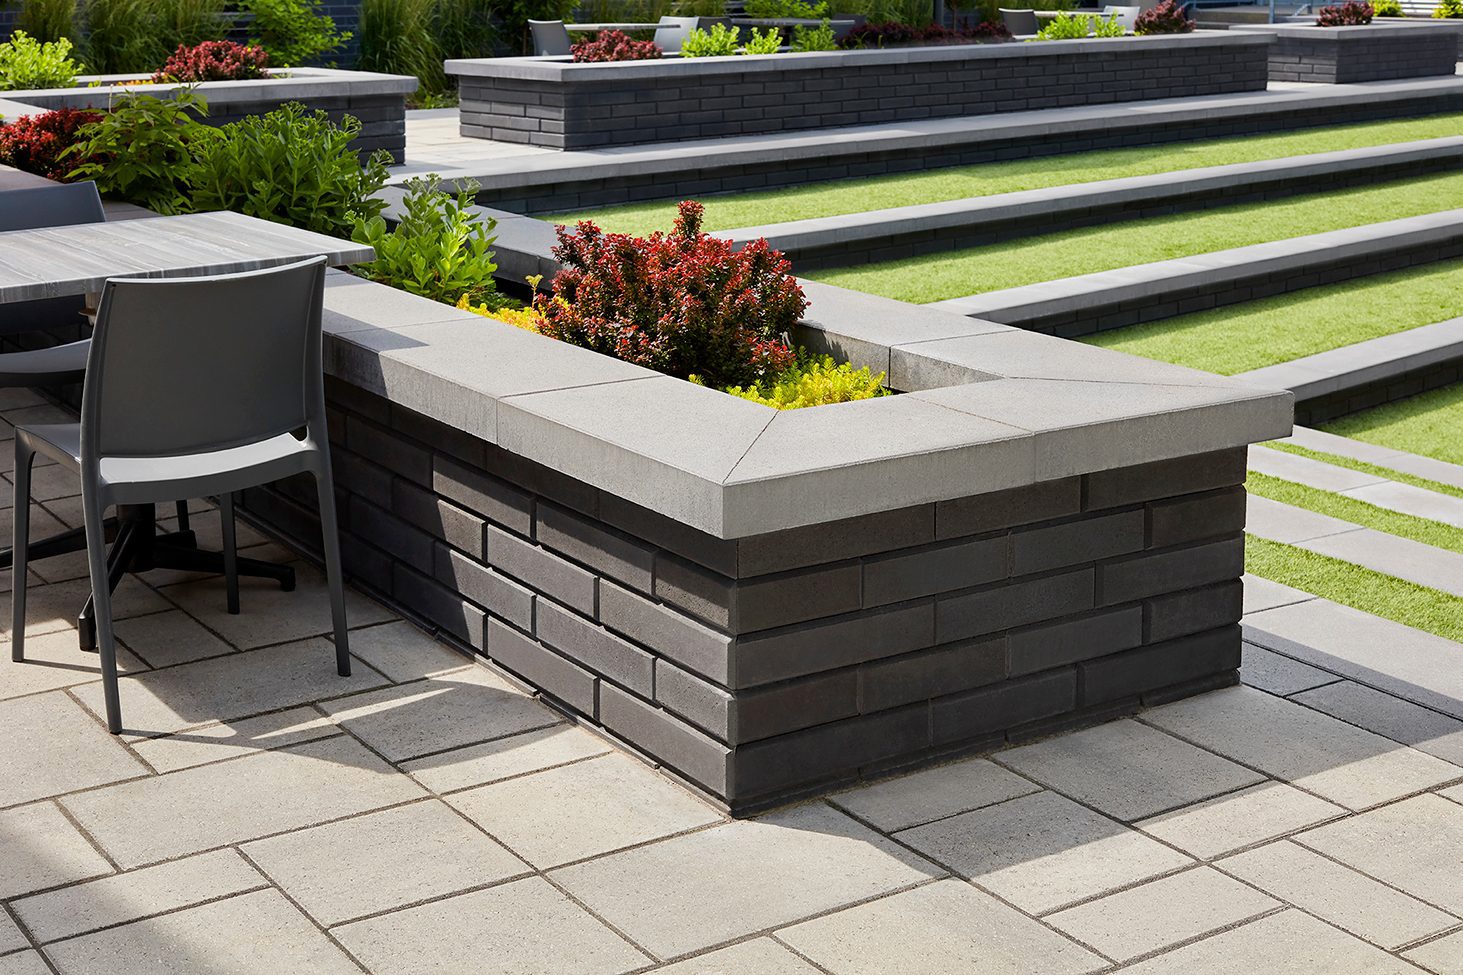 Techo-Bloc Raffinato Wall in Black Onyx and Raffinato Cap installed outside the West Island College in Montreal.